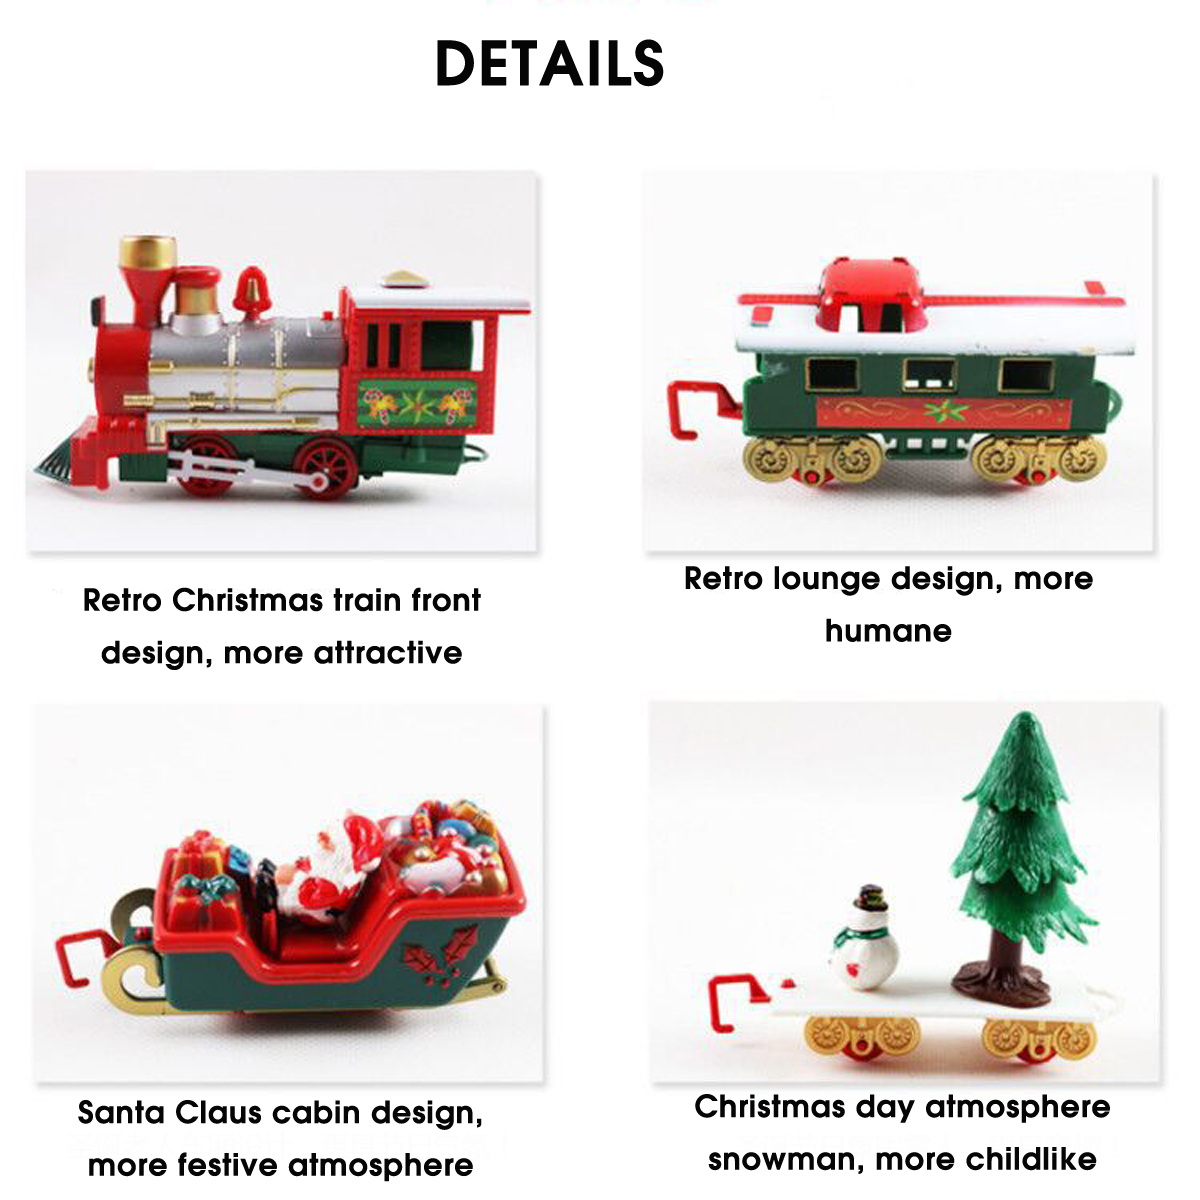 Christmas-Electric-Track-Train-With-Sound-Music-Children-Gift-Locomotive-Model-Toys-1400815